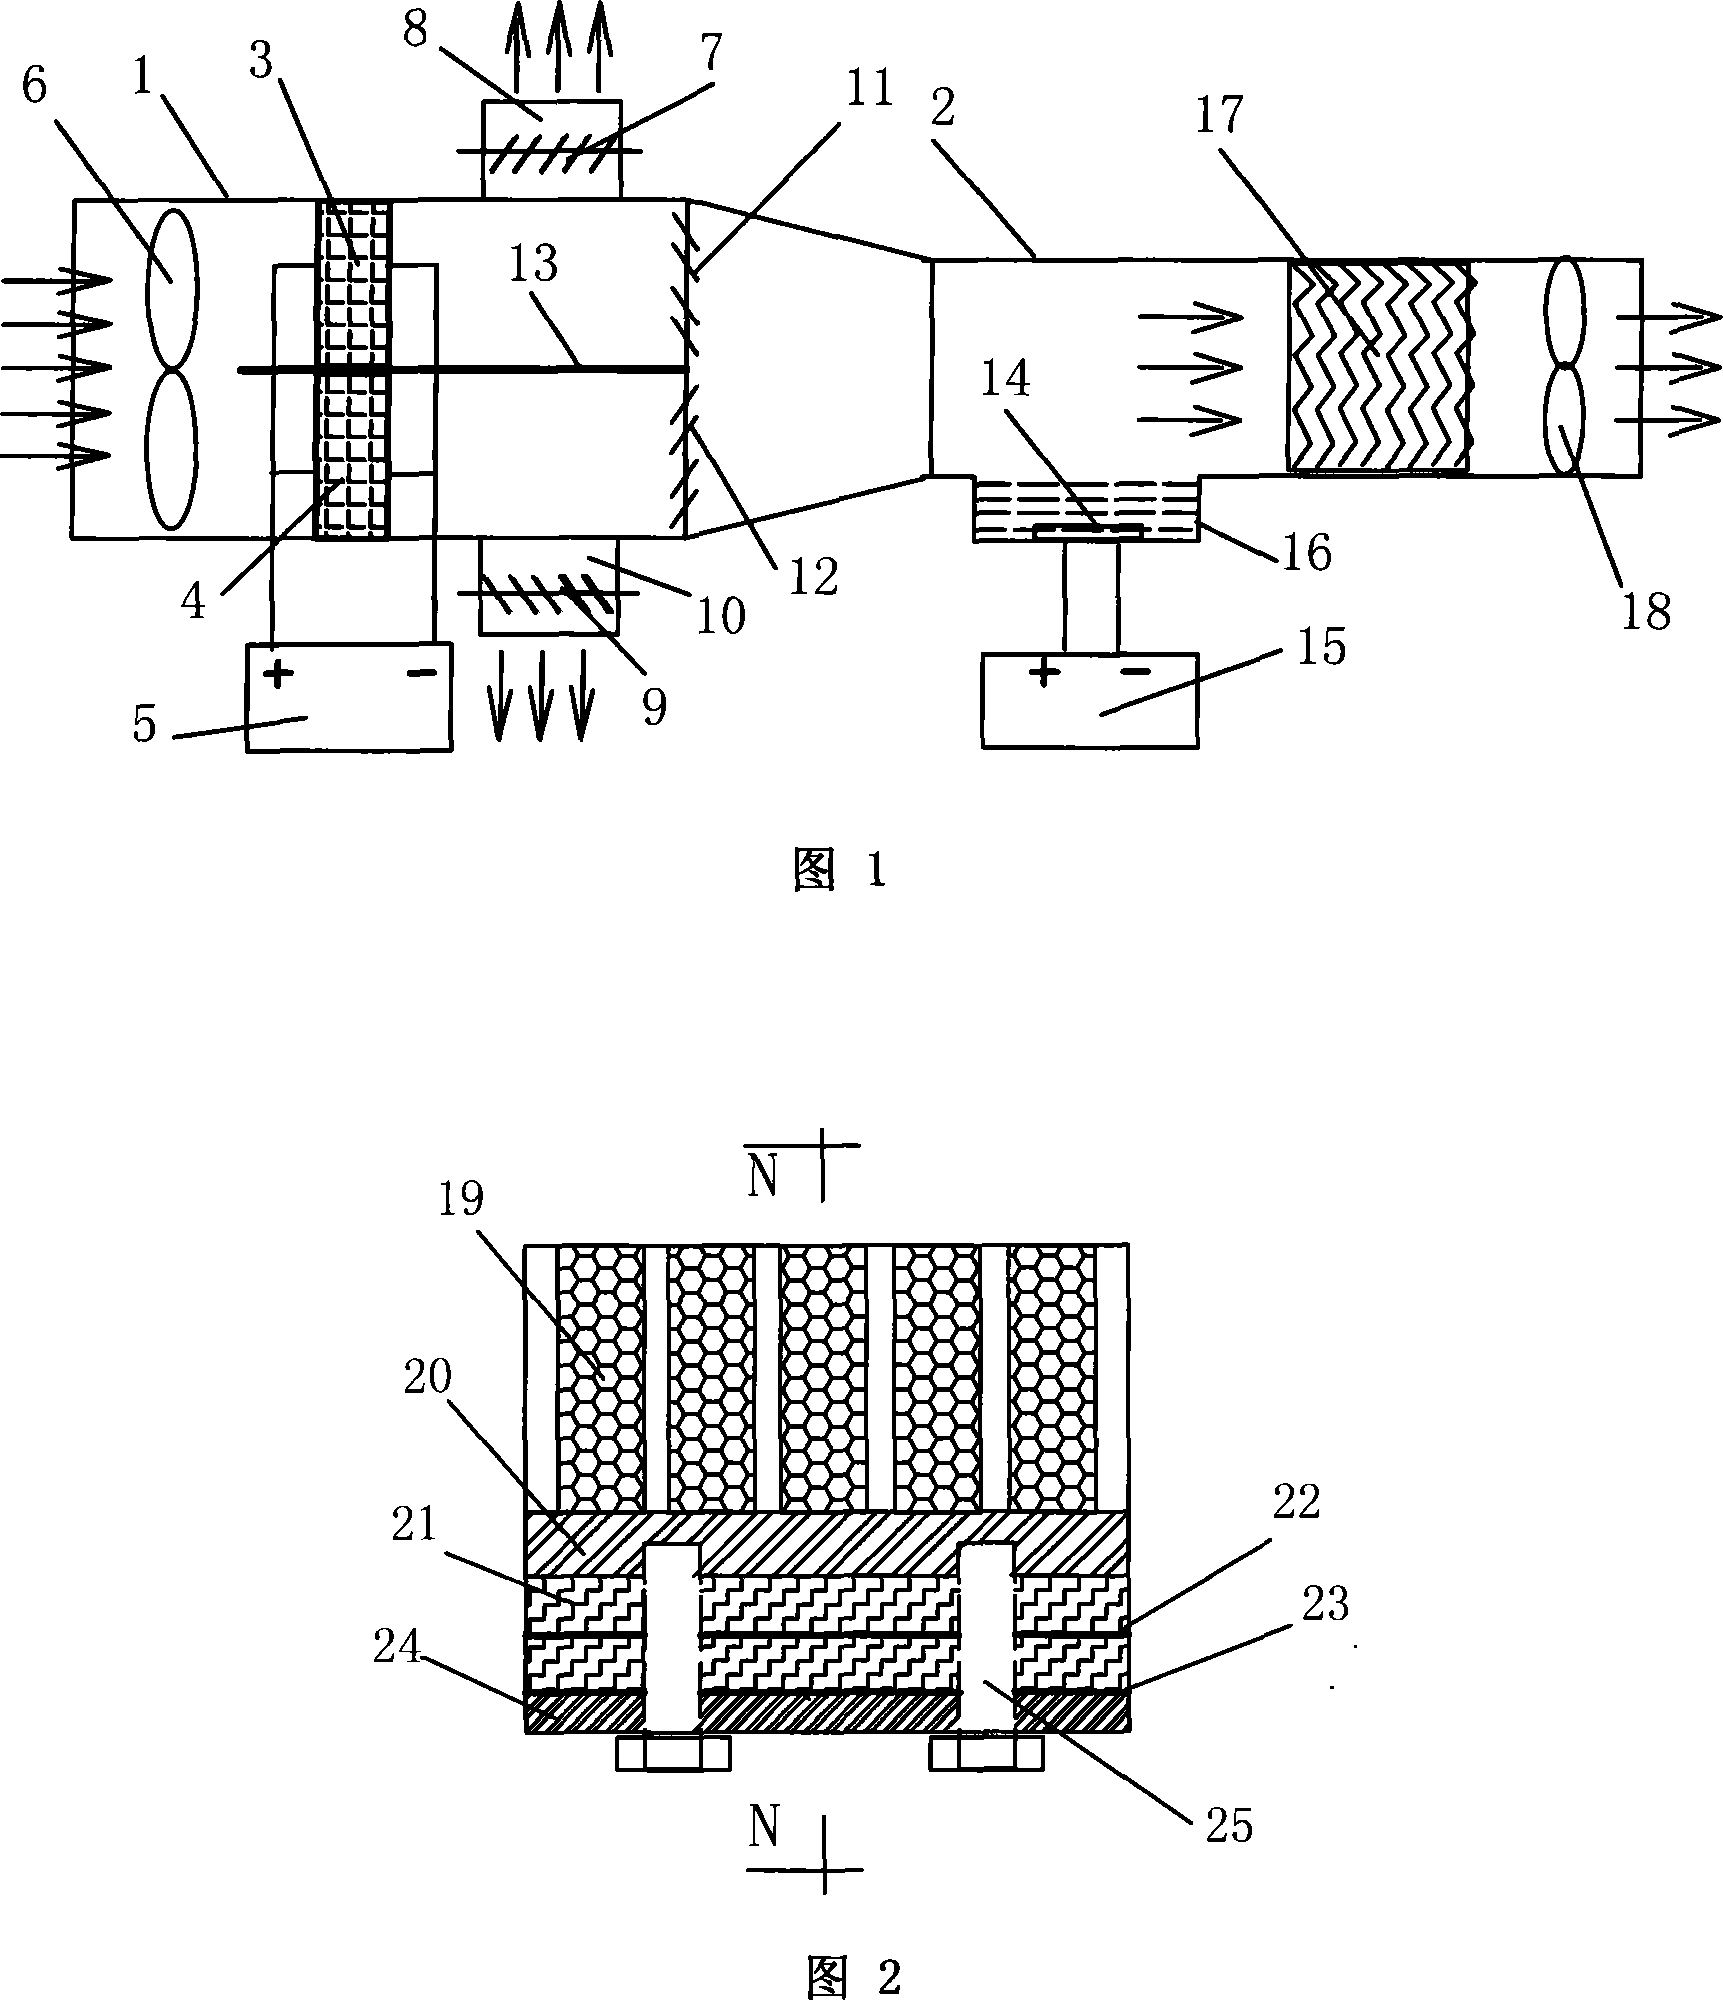 Vaporizing and cooling air conditioning device based on ultrasonic technology